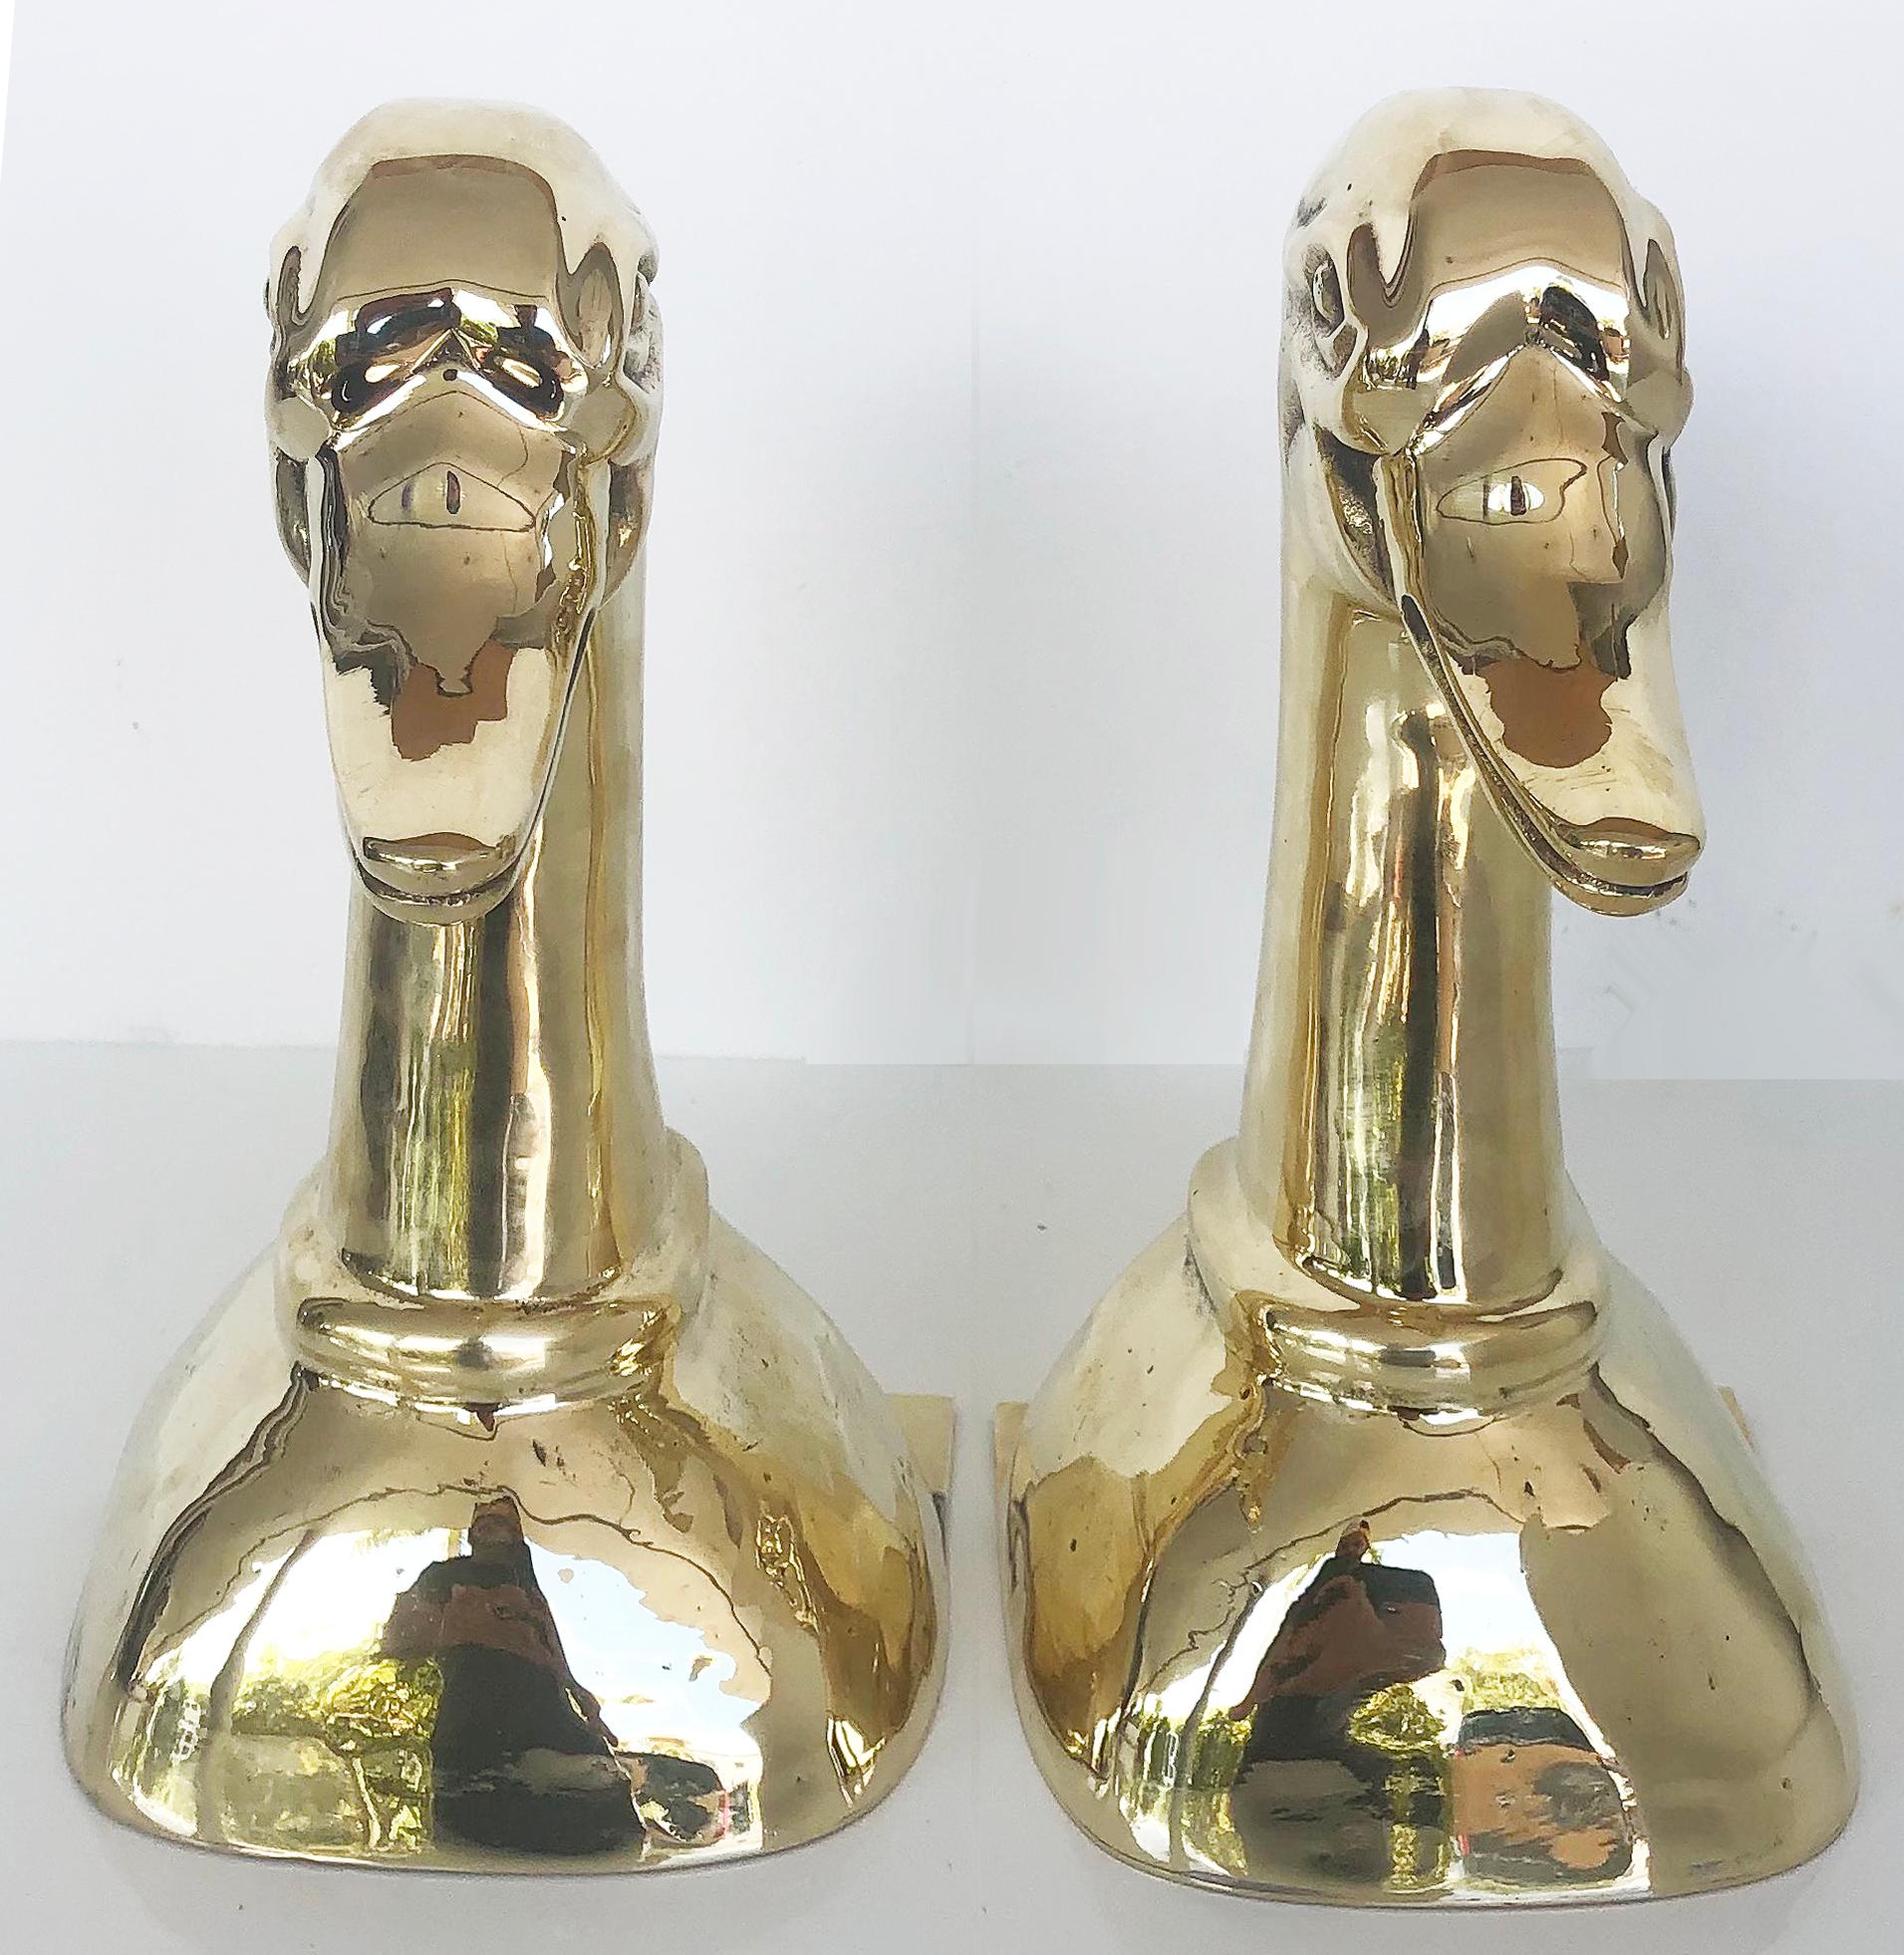 American Vintage Polished Brass Duck Head Bookends, Pair For Sale